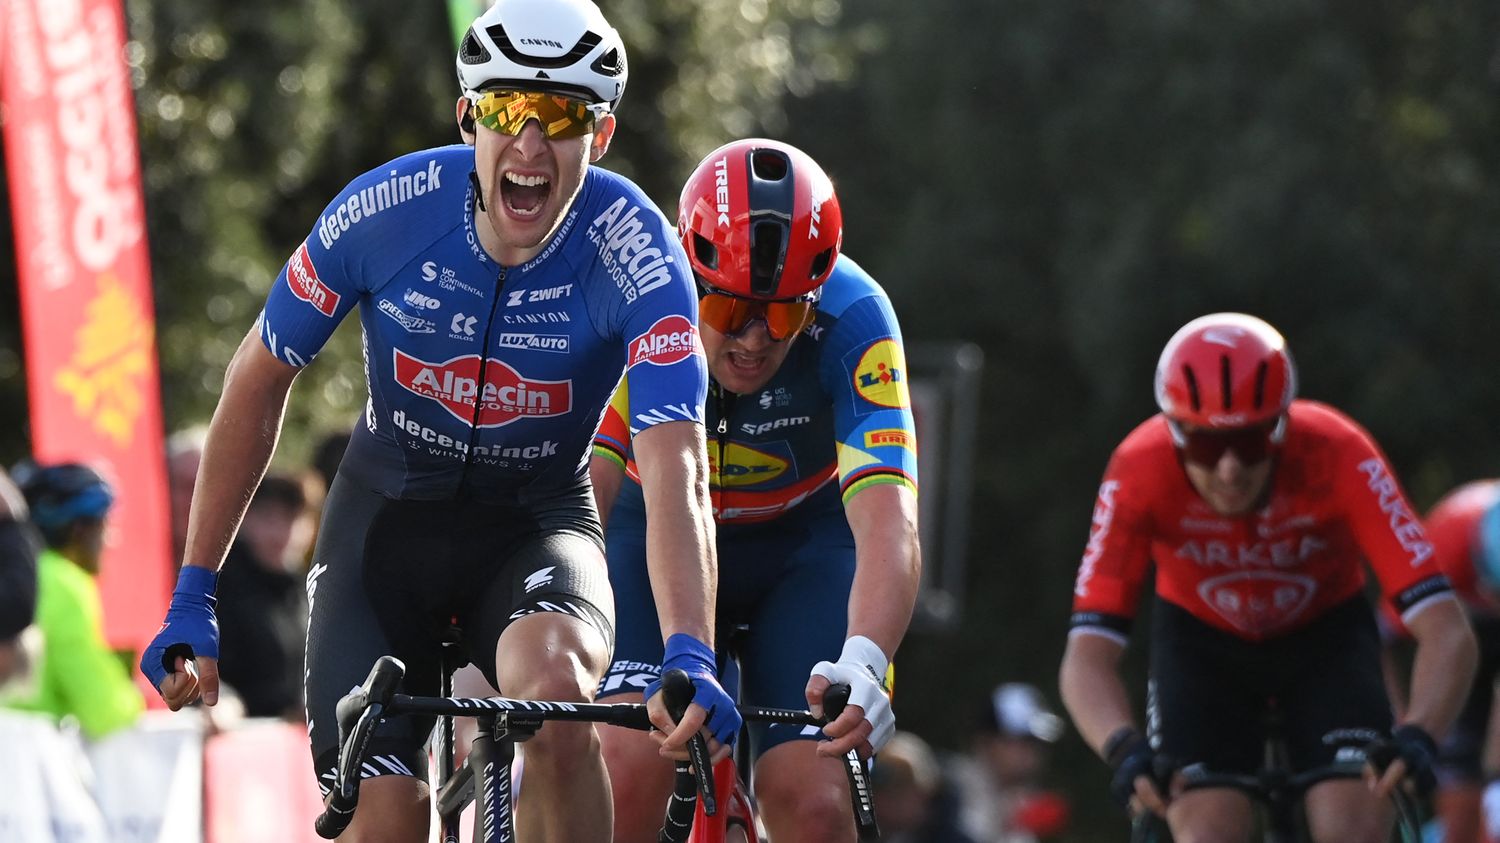 Cycling: who is Axel Laurance, winner of the World Tour at only 22 years old